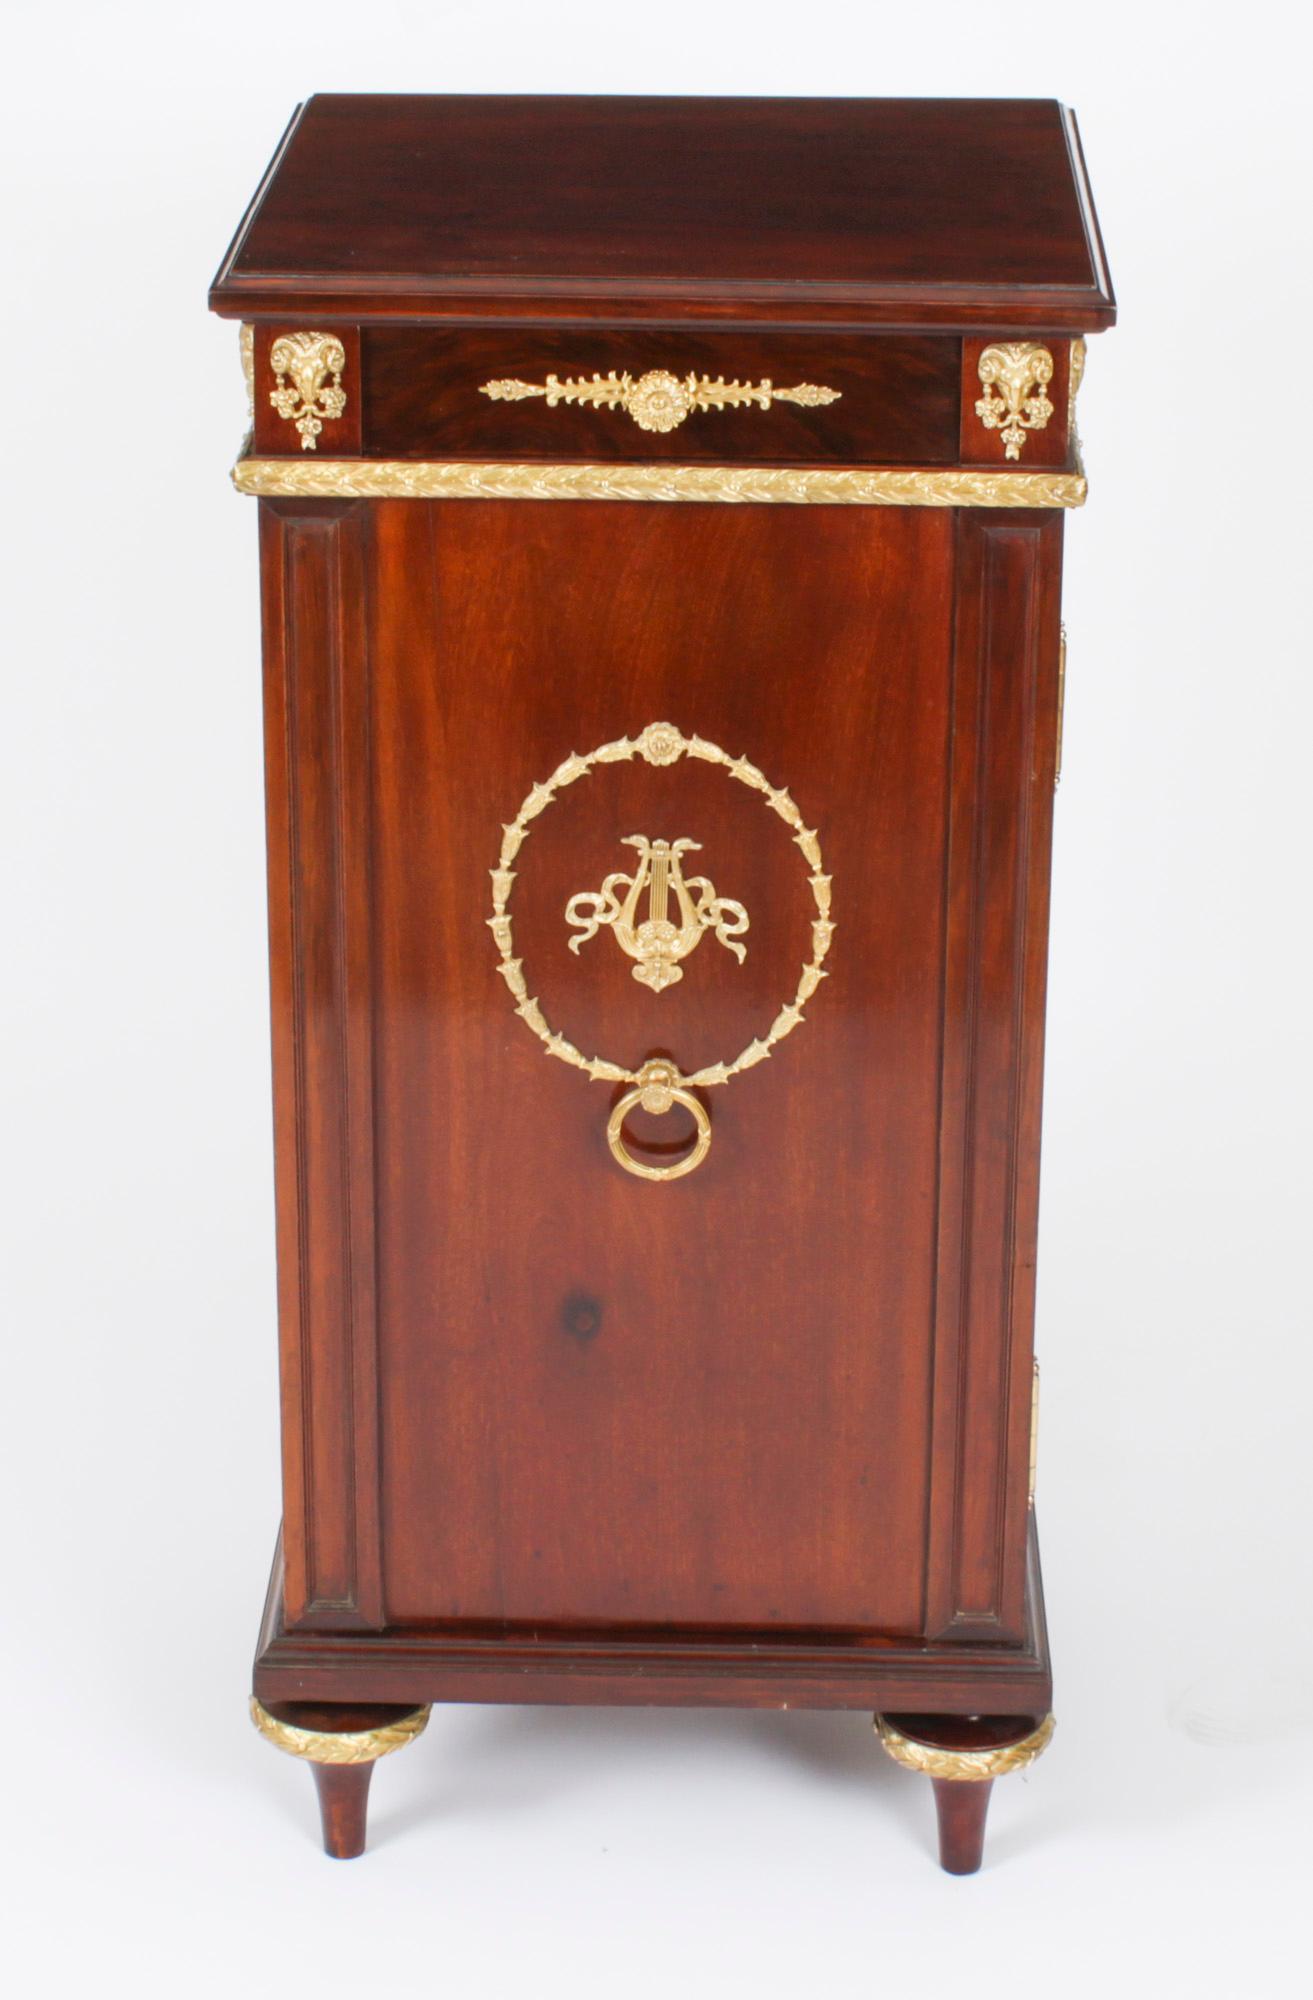 A superb French Empire mahogany and ormolu mounted pedestal cabinet, Circa 1870 in date.
   
THE BOTANICAL NAME FOR THE MAHOGANY THIS PEDESTAL IS MADE OF IS SWIETENIA MACROPHYLLA AND THIS TYPE OF MAHOGANY IS NOT SUBJECT TO CITES REGULATION.
   
The